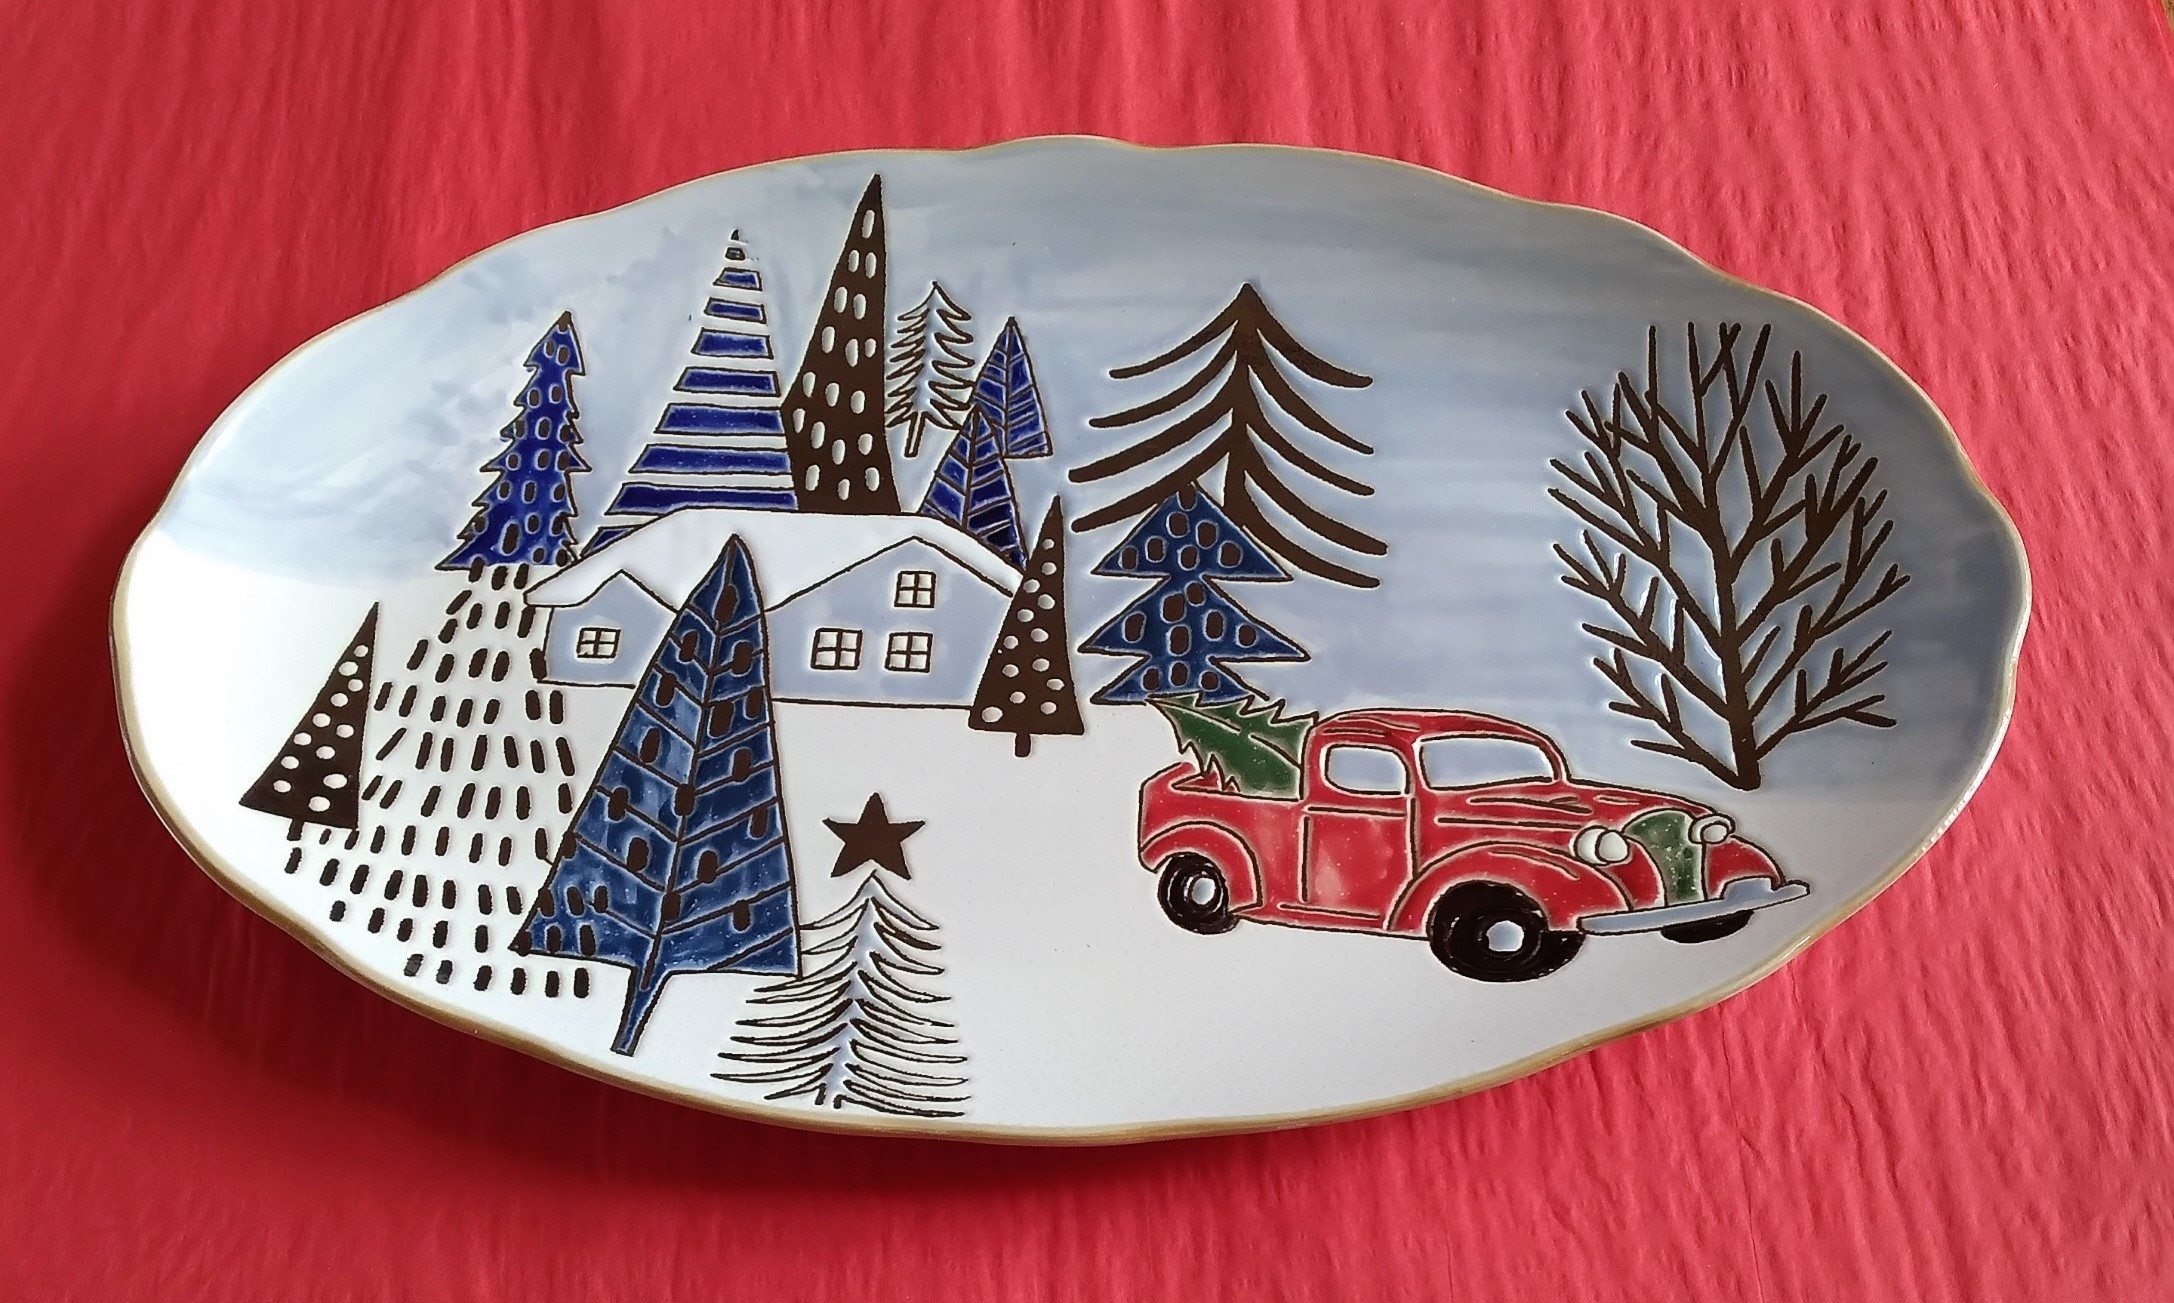 This Holiday Christmas Platter Elk Ridge Winter Plate 14" By Blue Sky Clayworks is made with love by Premier Homegoods! Shop more unique gift ideas today with Spots Initiatives, the best way to support creators.